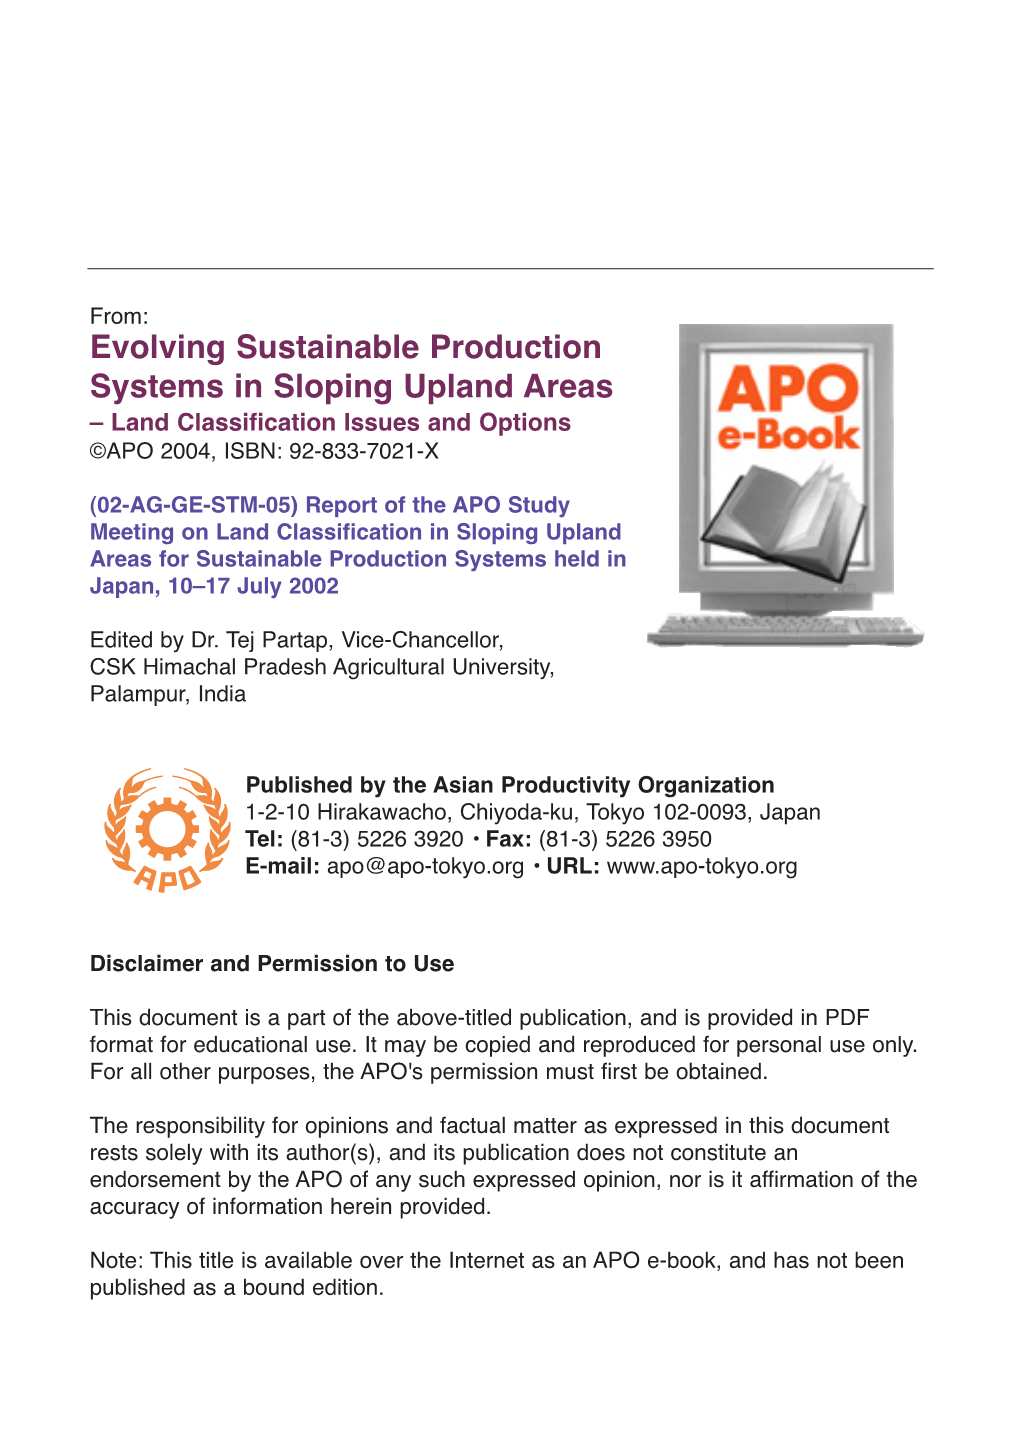 Evolving Sustainable Production Systems in Sloping Upland Areas – Land Classification Issues and Options ©APO 2004, ISBN: 92-833-7021-X